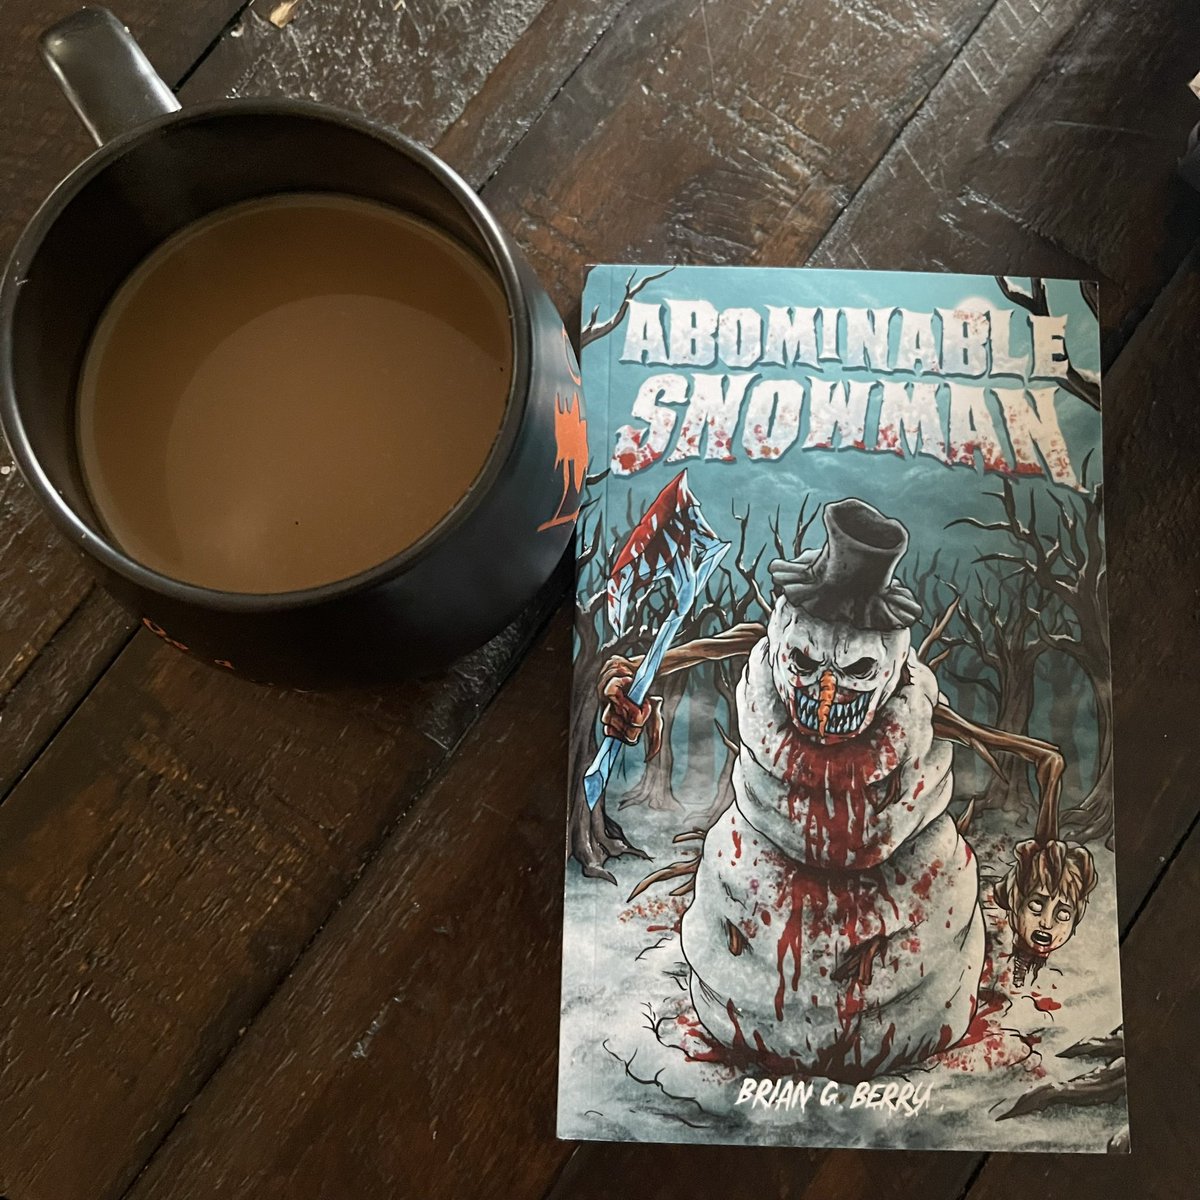 Coffee and a book ✨✨

I am continuing my winter reads with this gem by Brian Berry.  ⛄️ ❄️ 🩸 

#currentlyreading #horrorreads #HorrorCommunity #amreading #horrorbooks